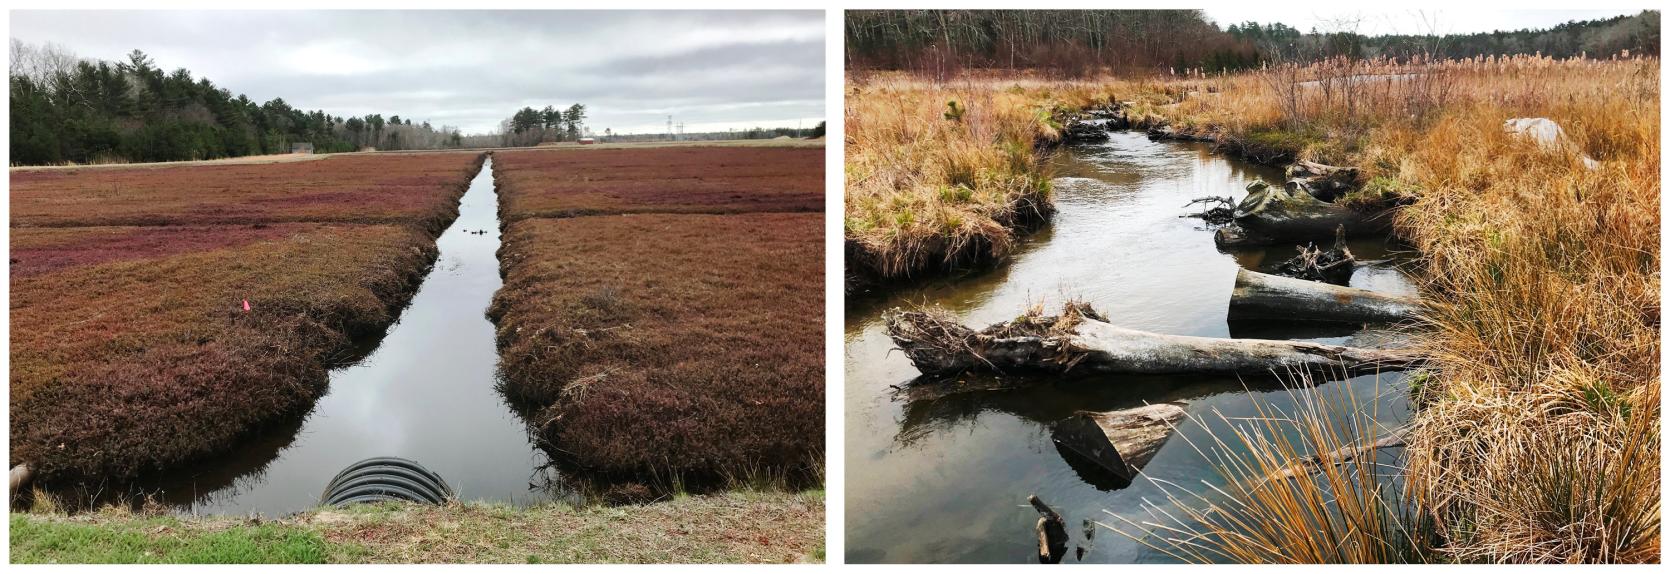 Two images of cranberry bogs prior to restoration